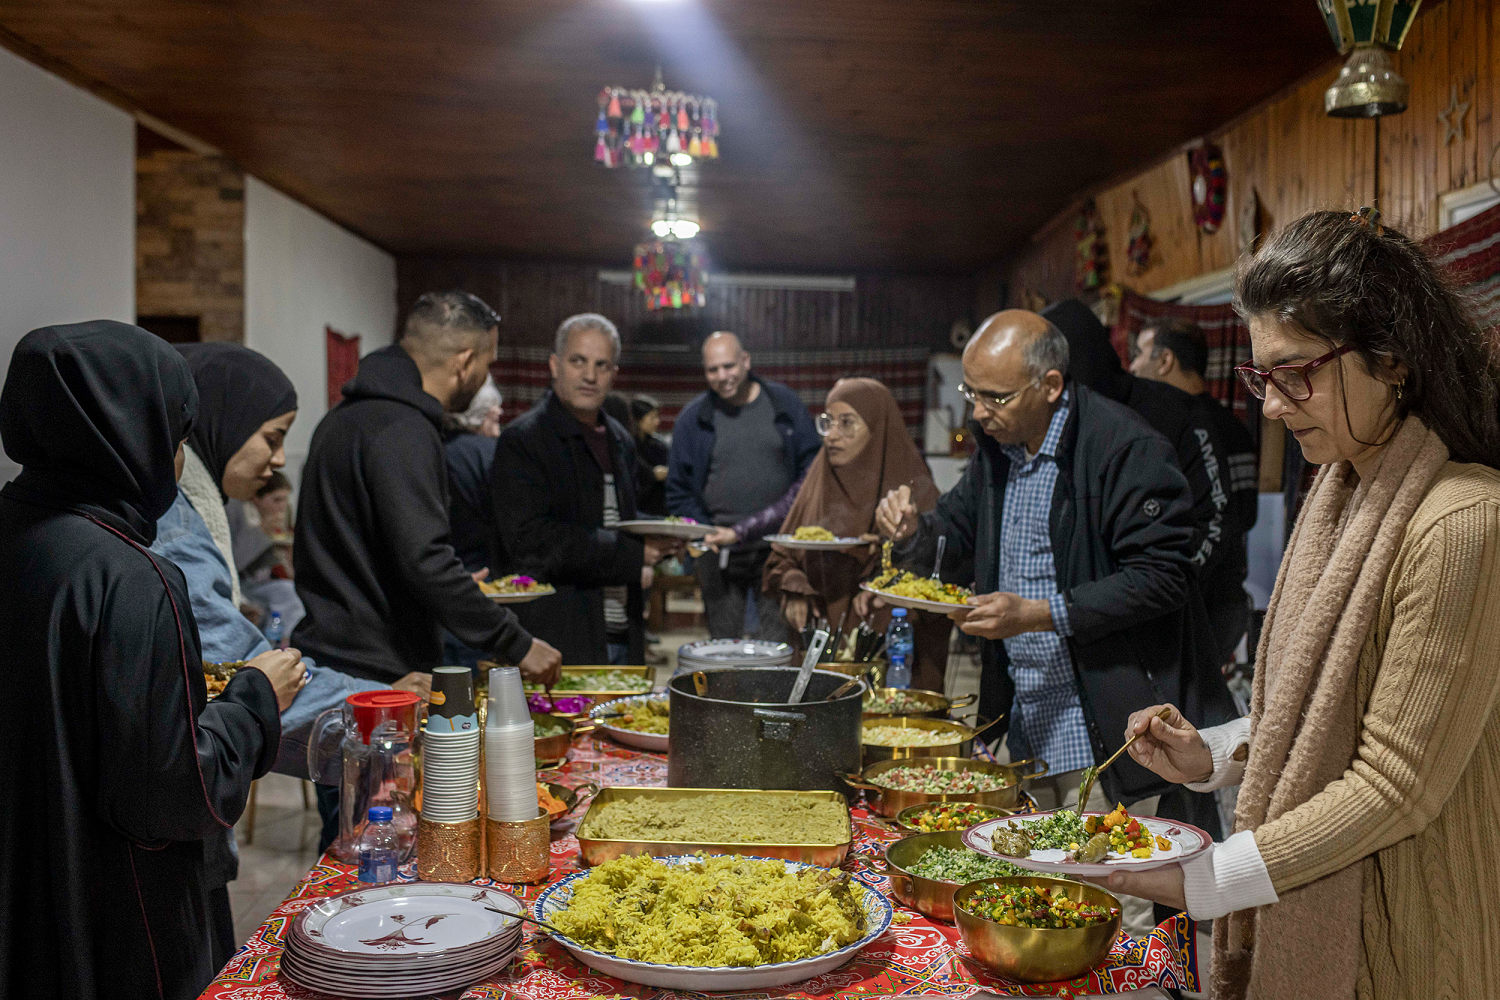 At a Ramadan meal, Palestinian Bedouin invite Jewish Israelis to the table